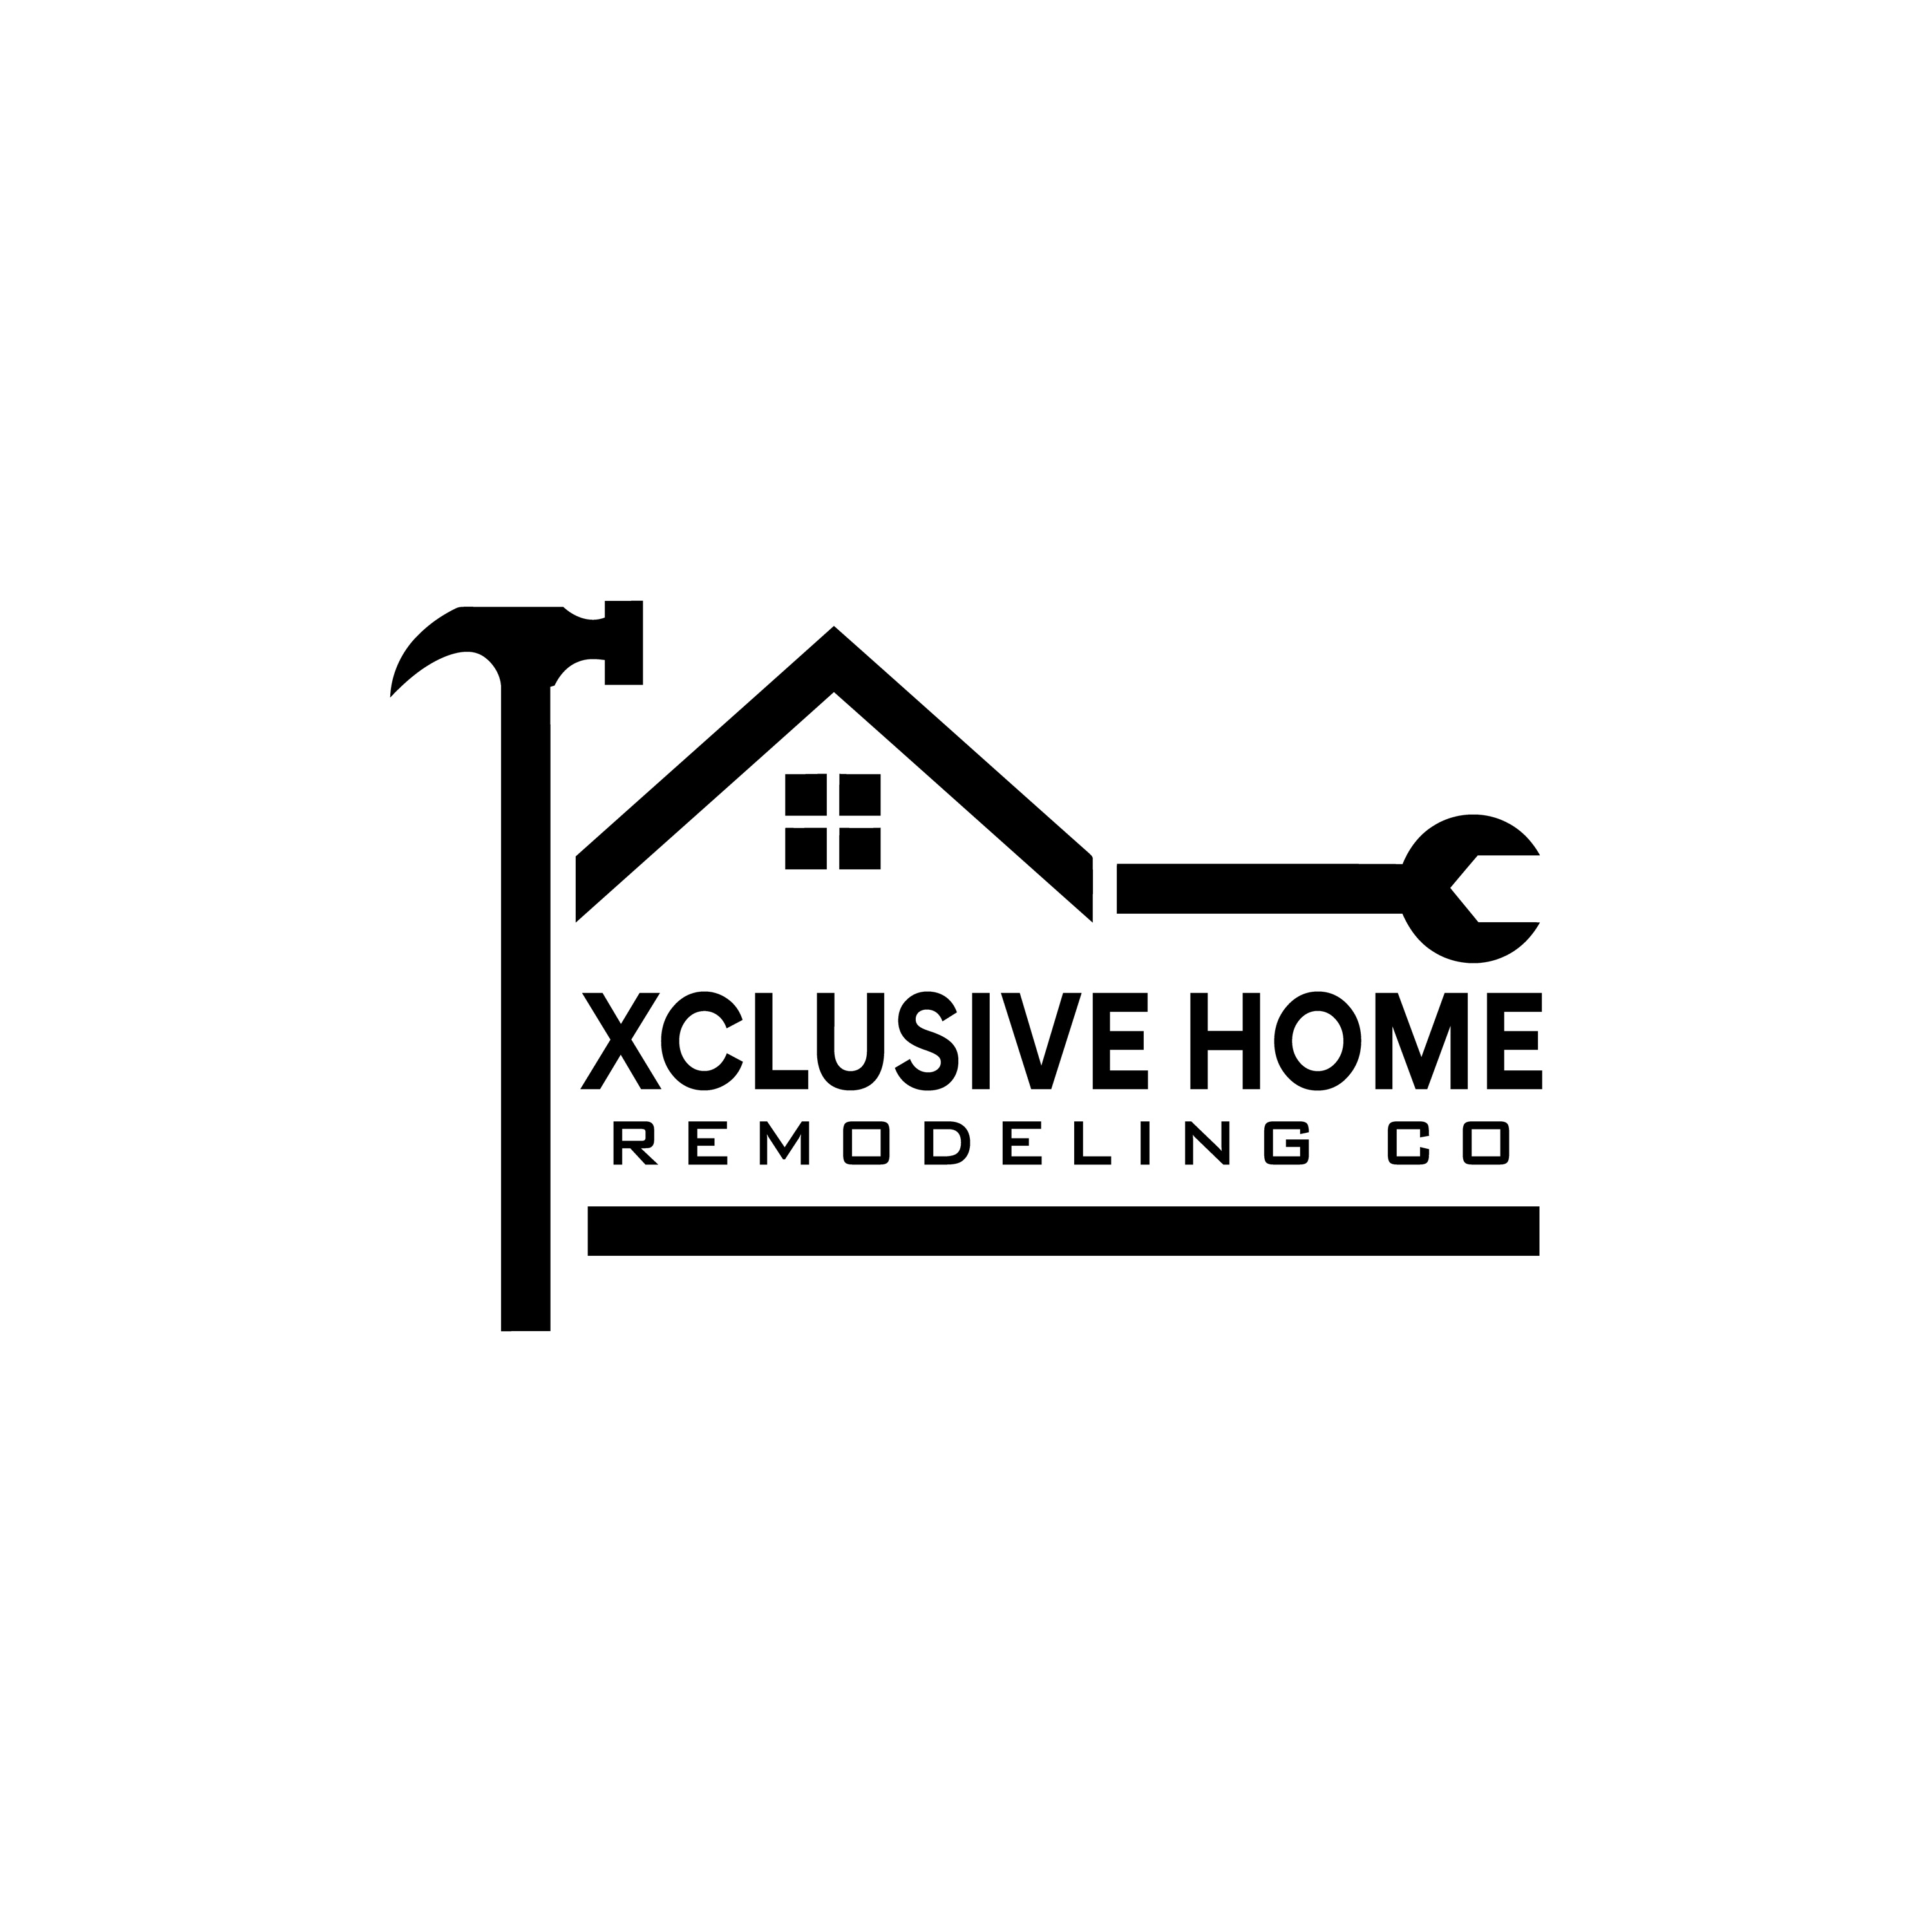 Xclusive Home Remodeling Co. Logo